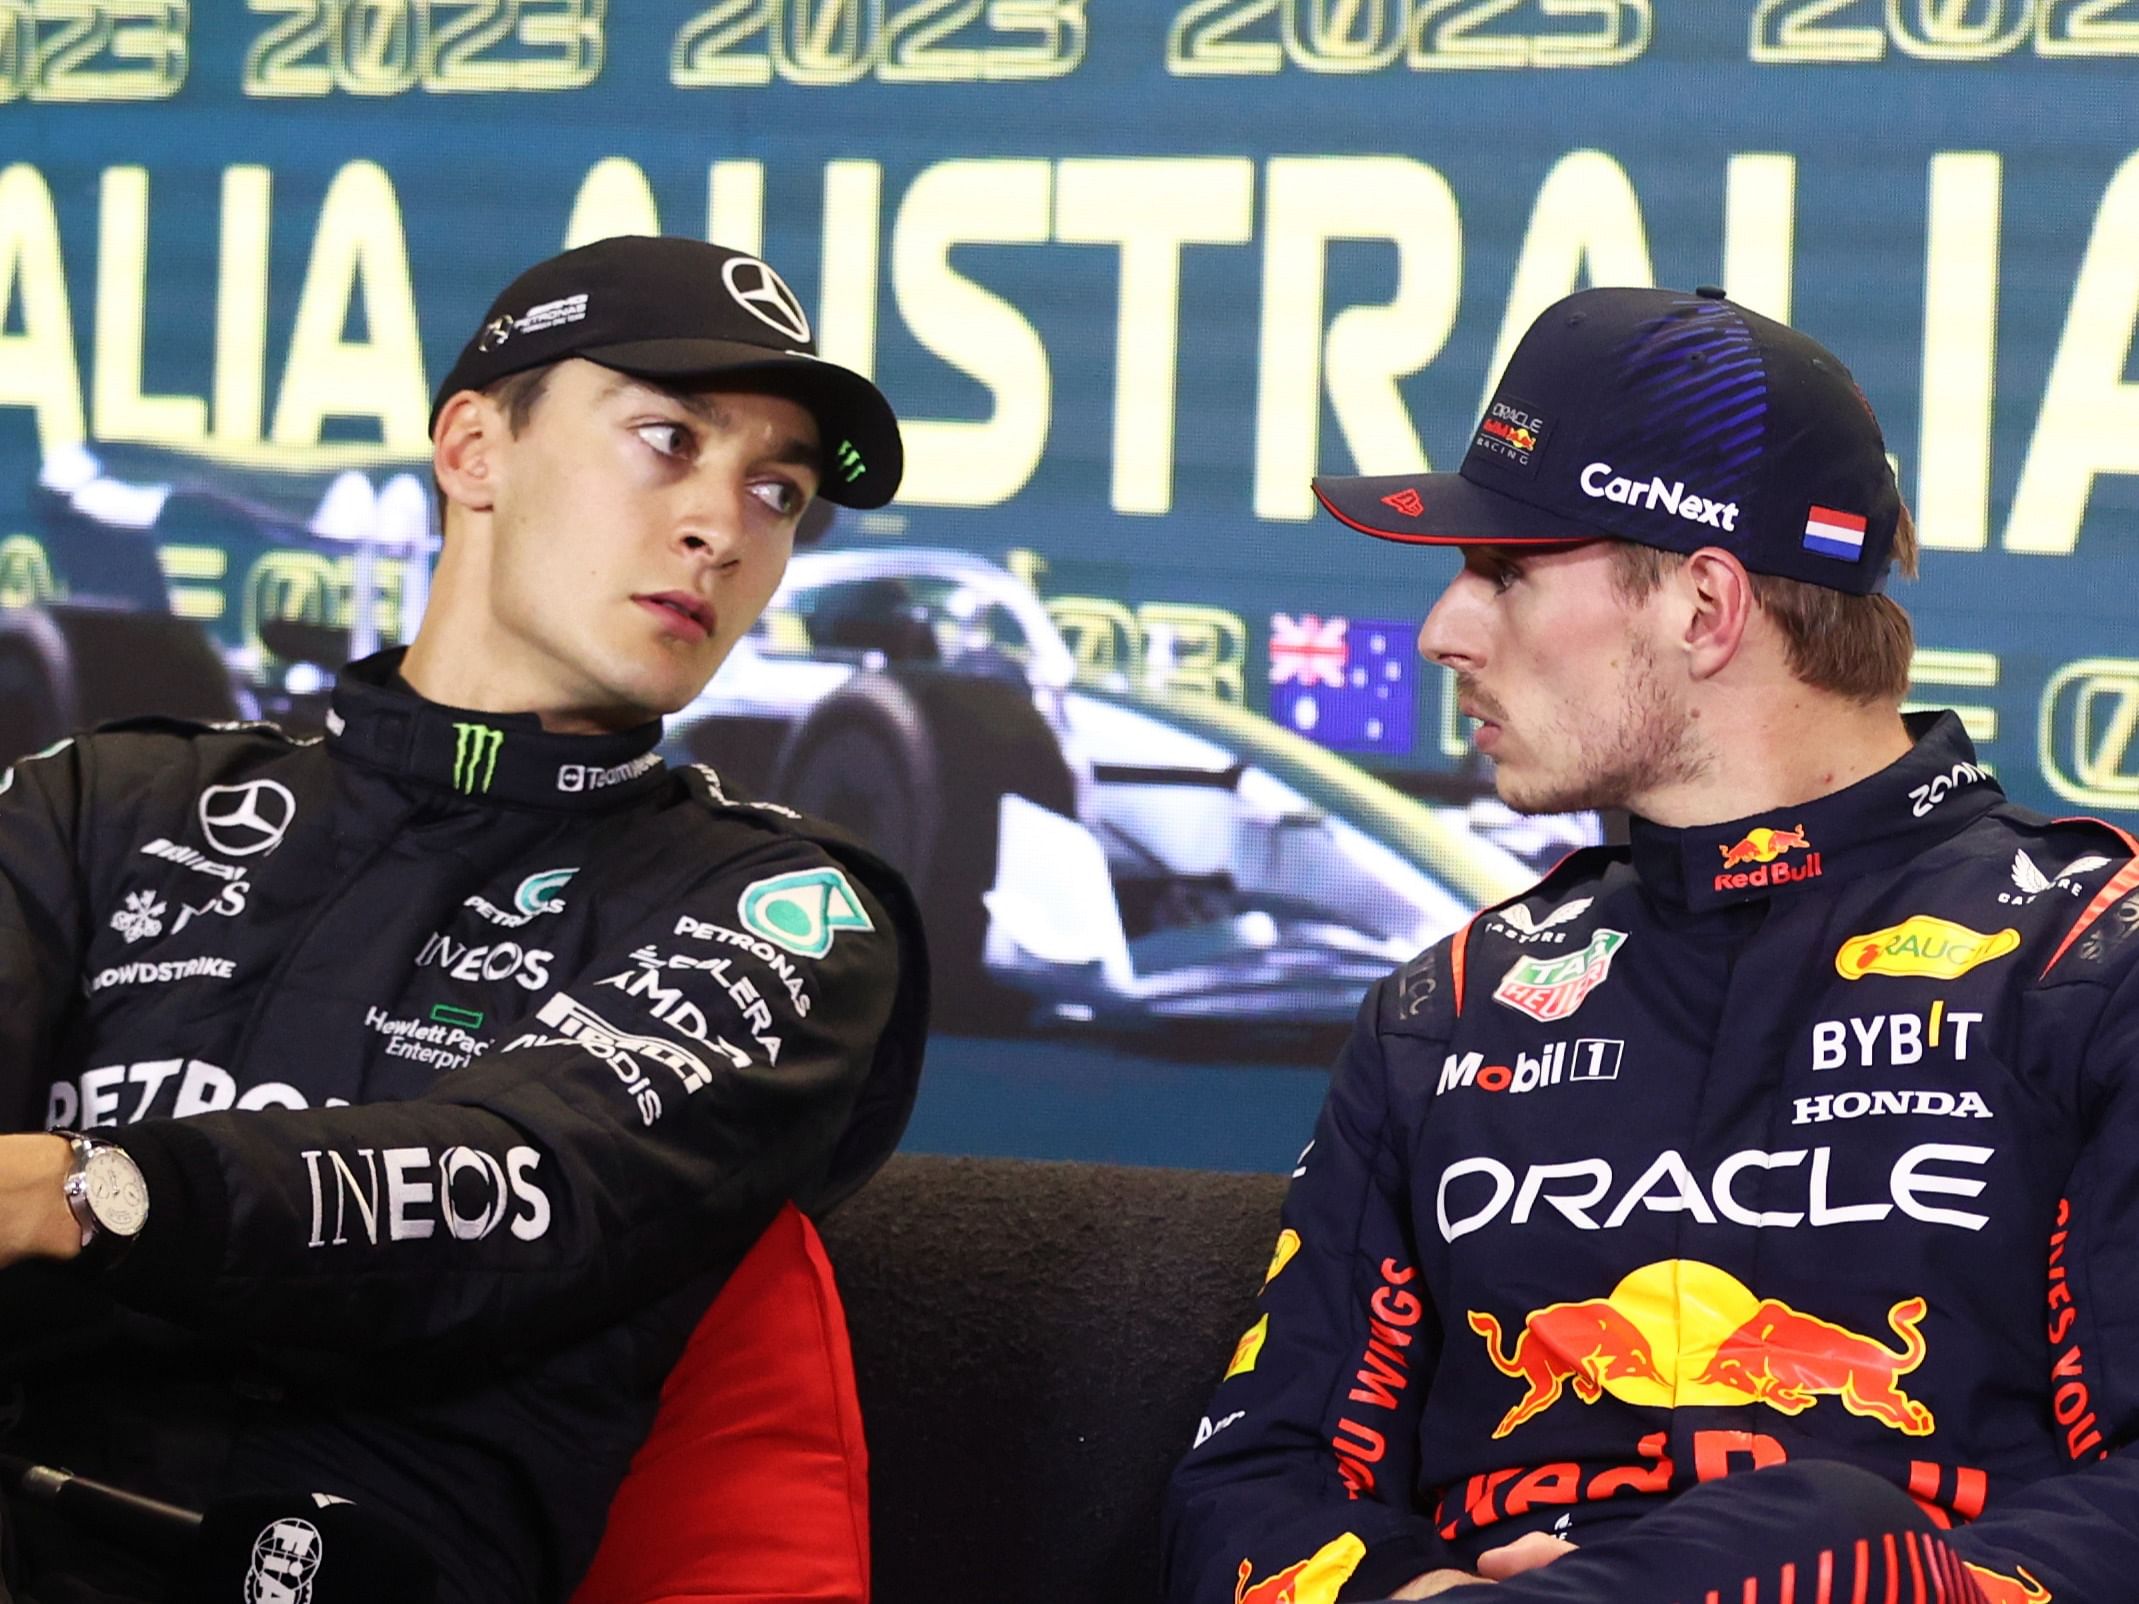 Max Verstappen (R) and George Russell (L) attend the press conference after qualifying ahead of the 2023 F1 Australian Grand Prix. (Photo by Robert Cianflone/Getty Images)